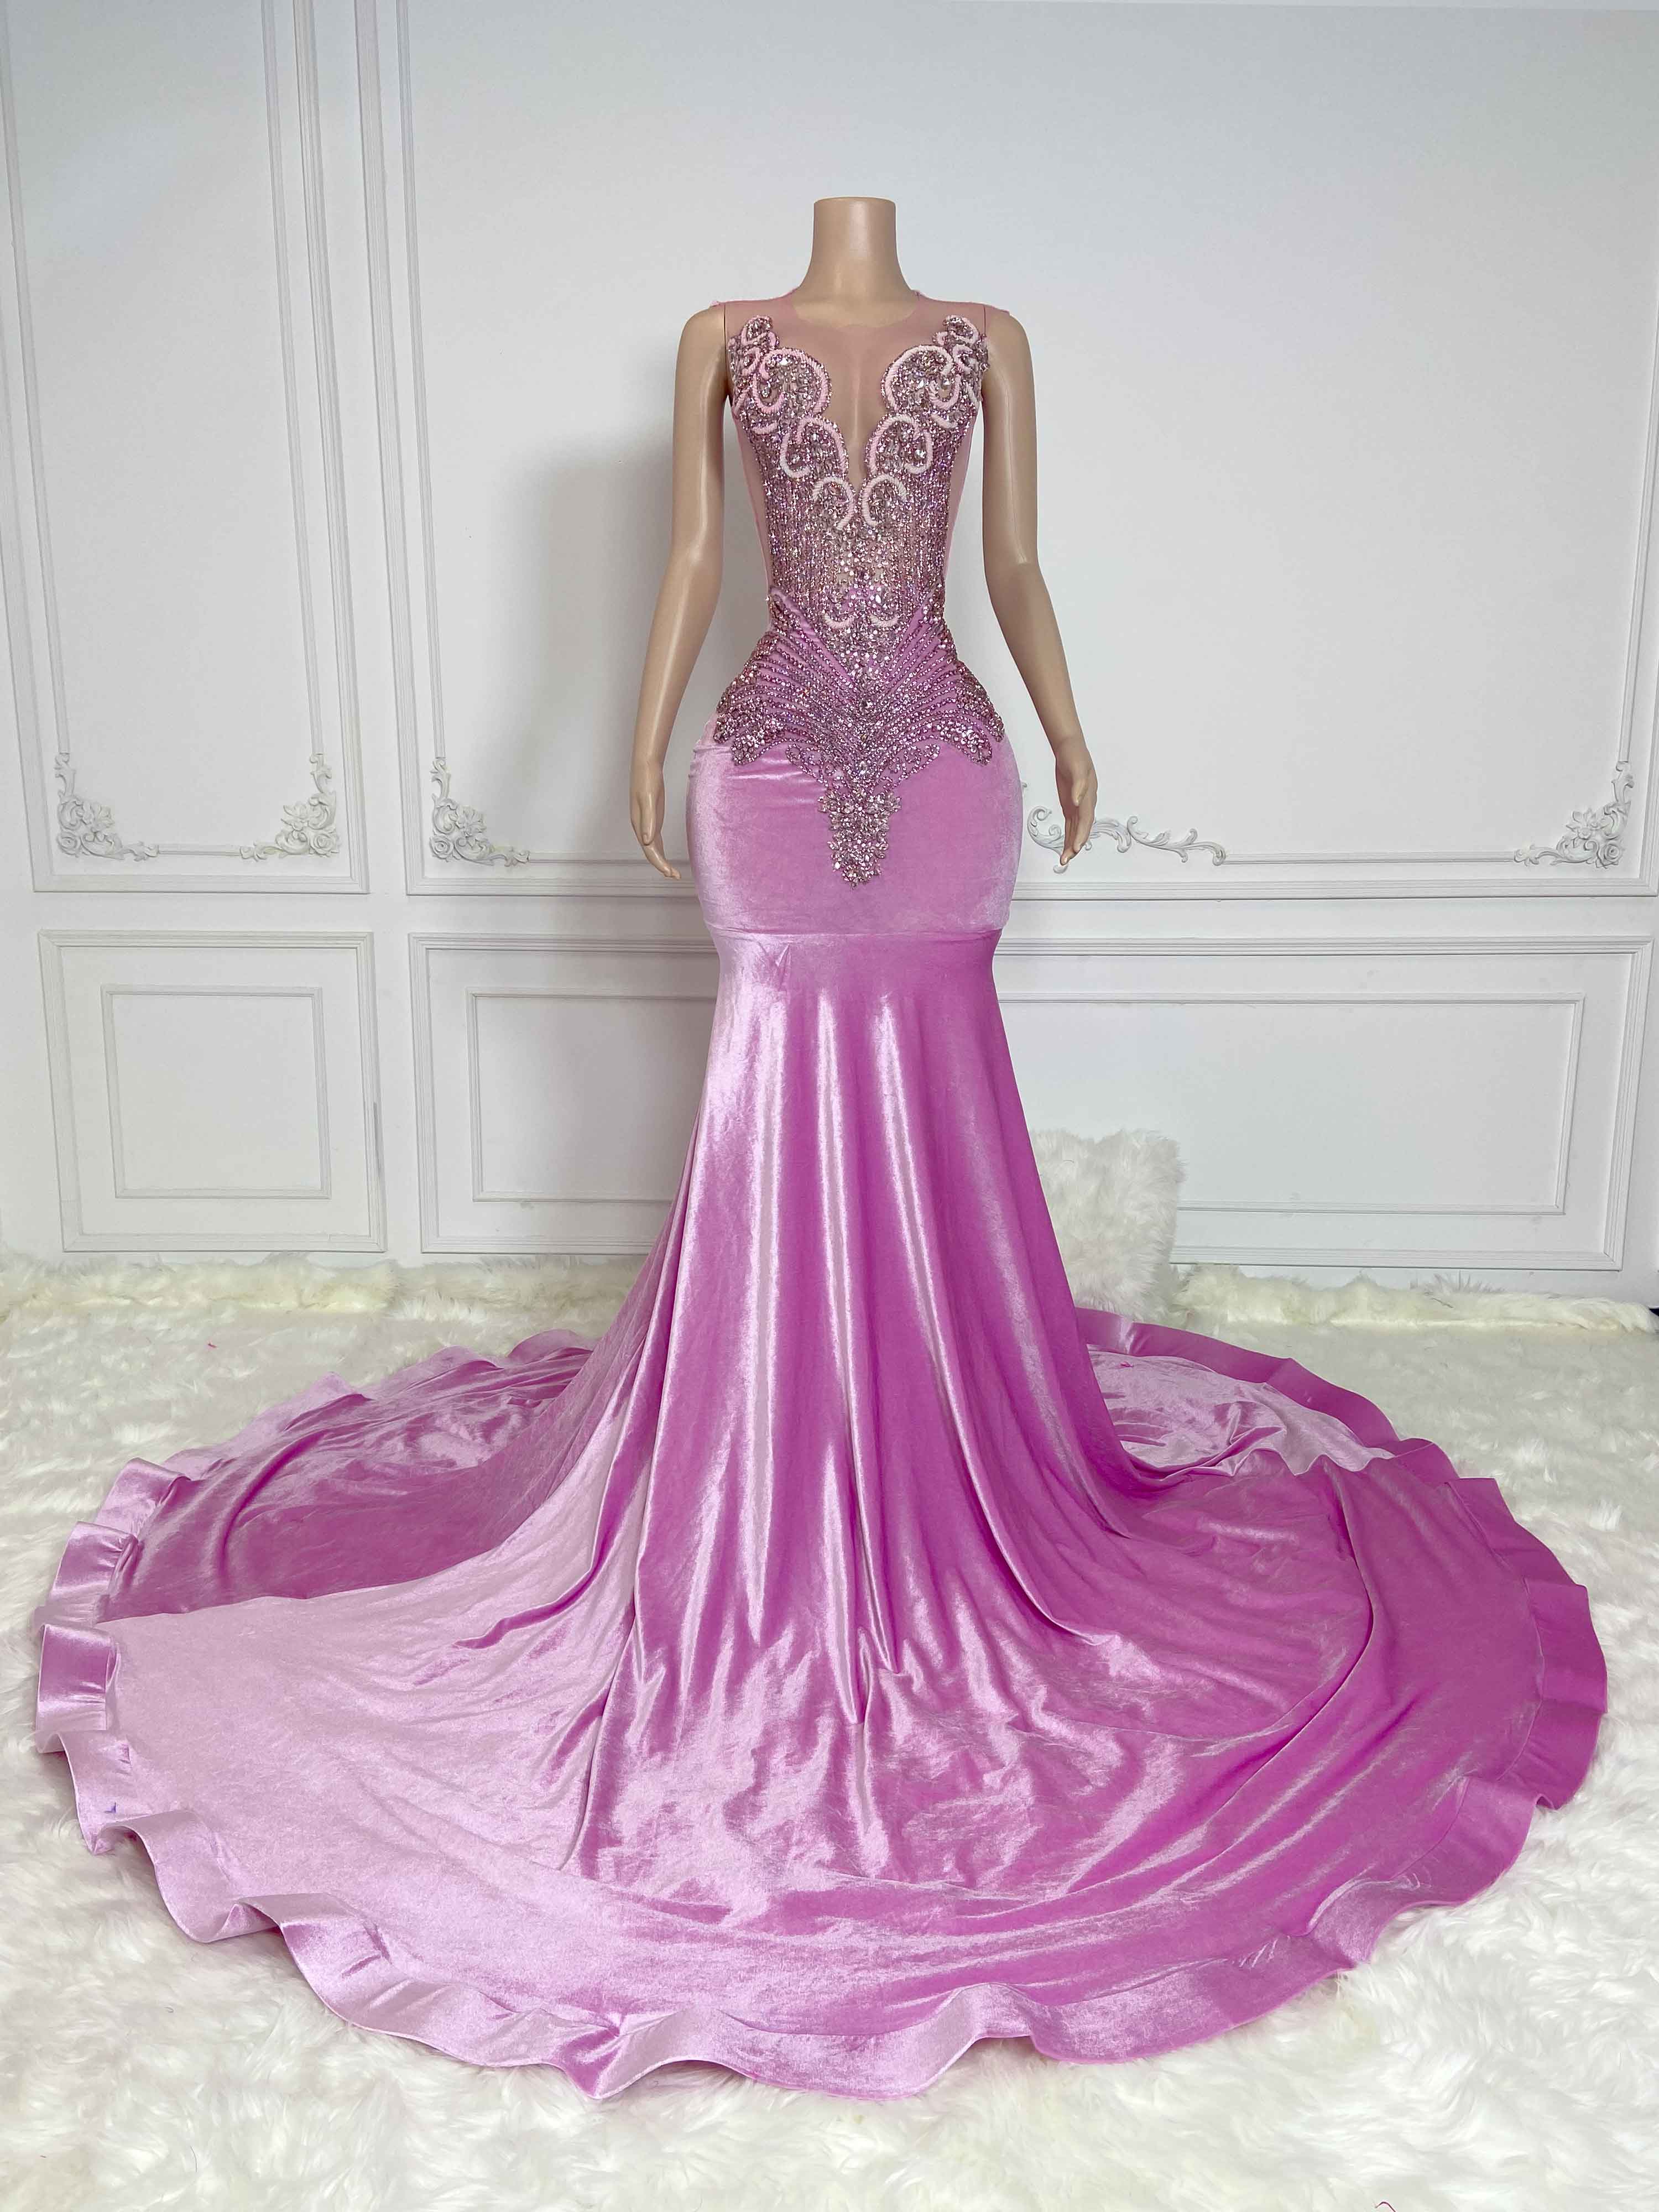 Pink Velvet Hollow Out and Rhinestone Sleeveless Maxi Gown